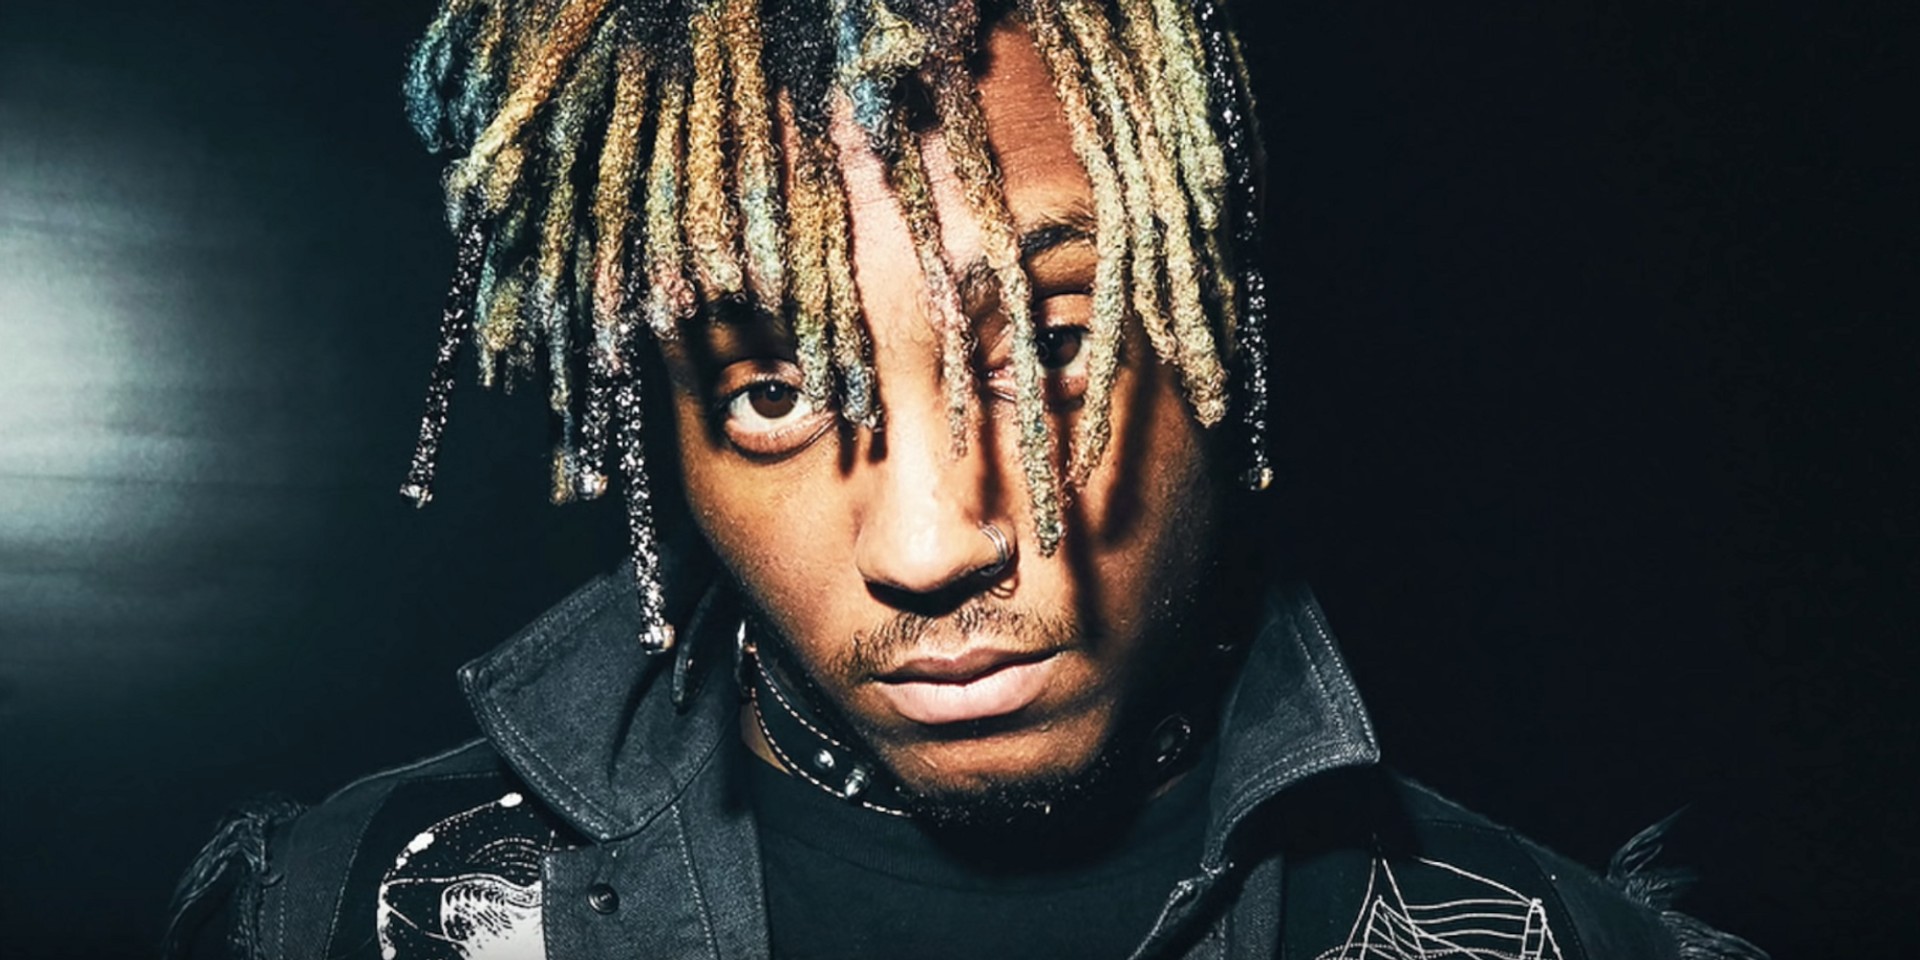 Rapper Juice WRLD has reportedly passed away